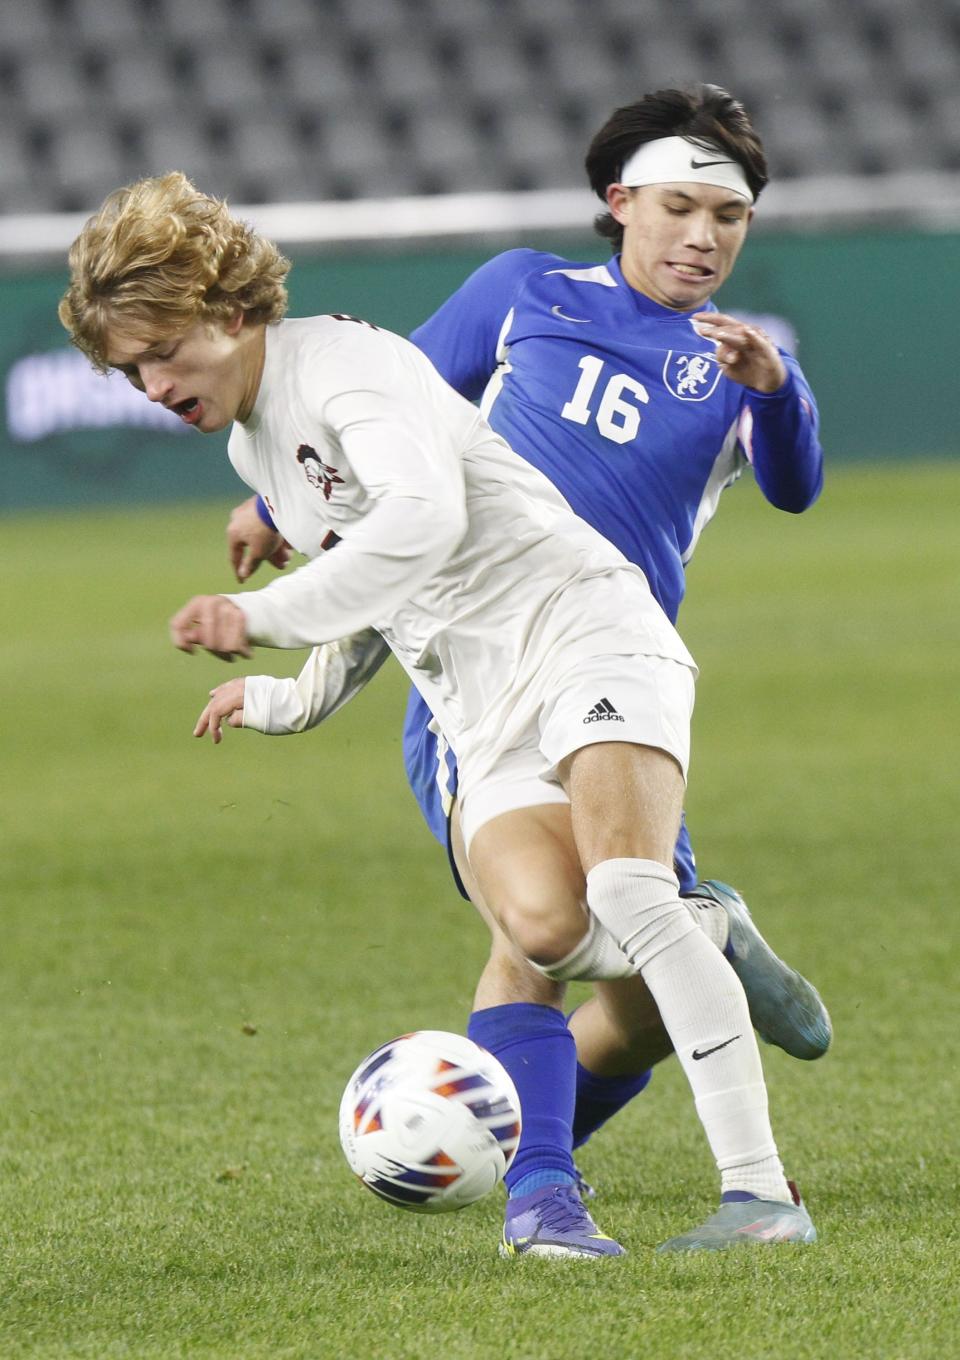 Lima Shawnee's Luca Fusillo and Bexley's Ethan Nguyen fight for the ball during the Division II State Soccer Championship game at Lower.com Field on Nov. 12. Bexley lost in a shootout. 